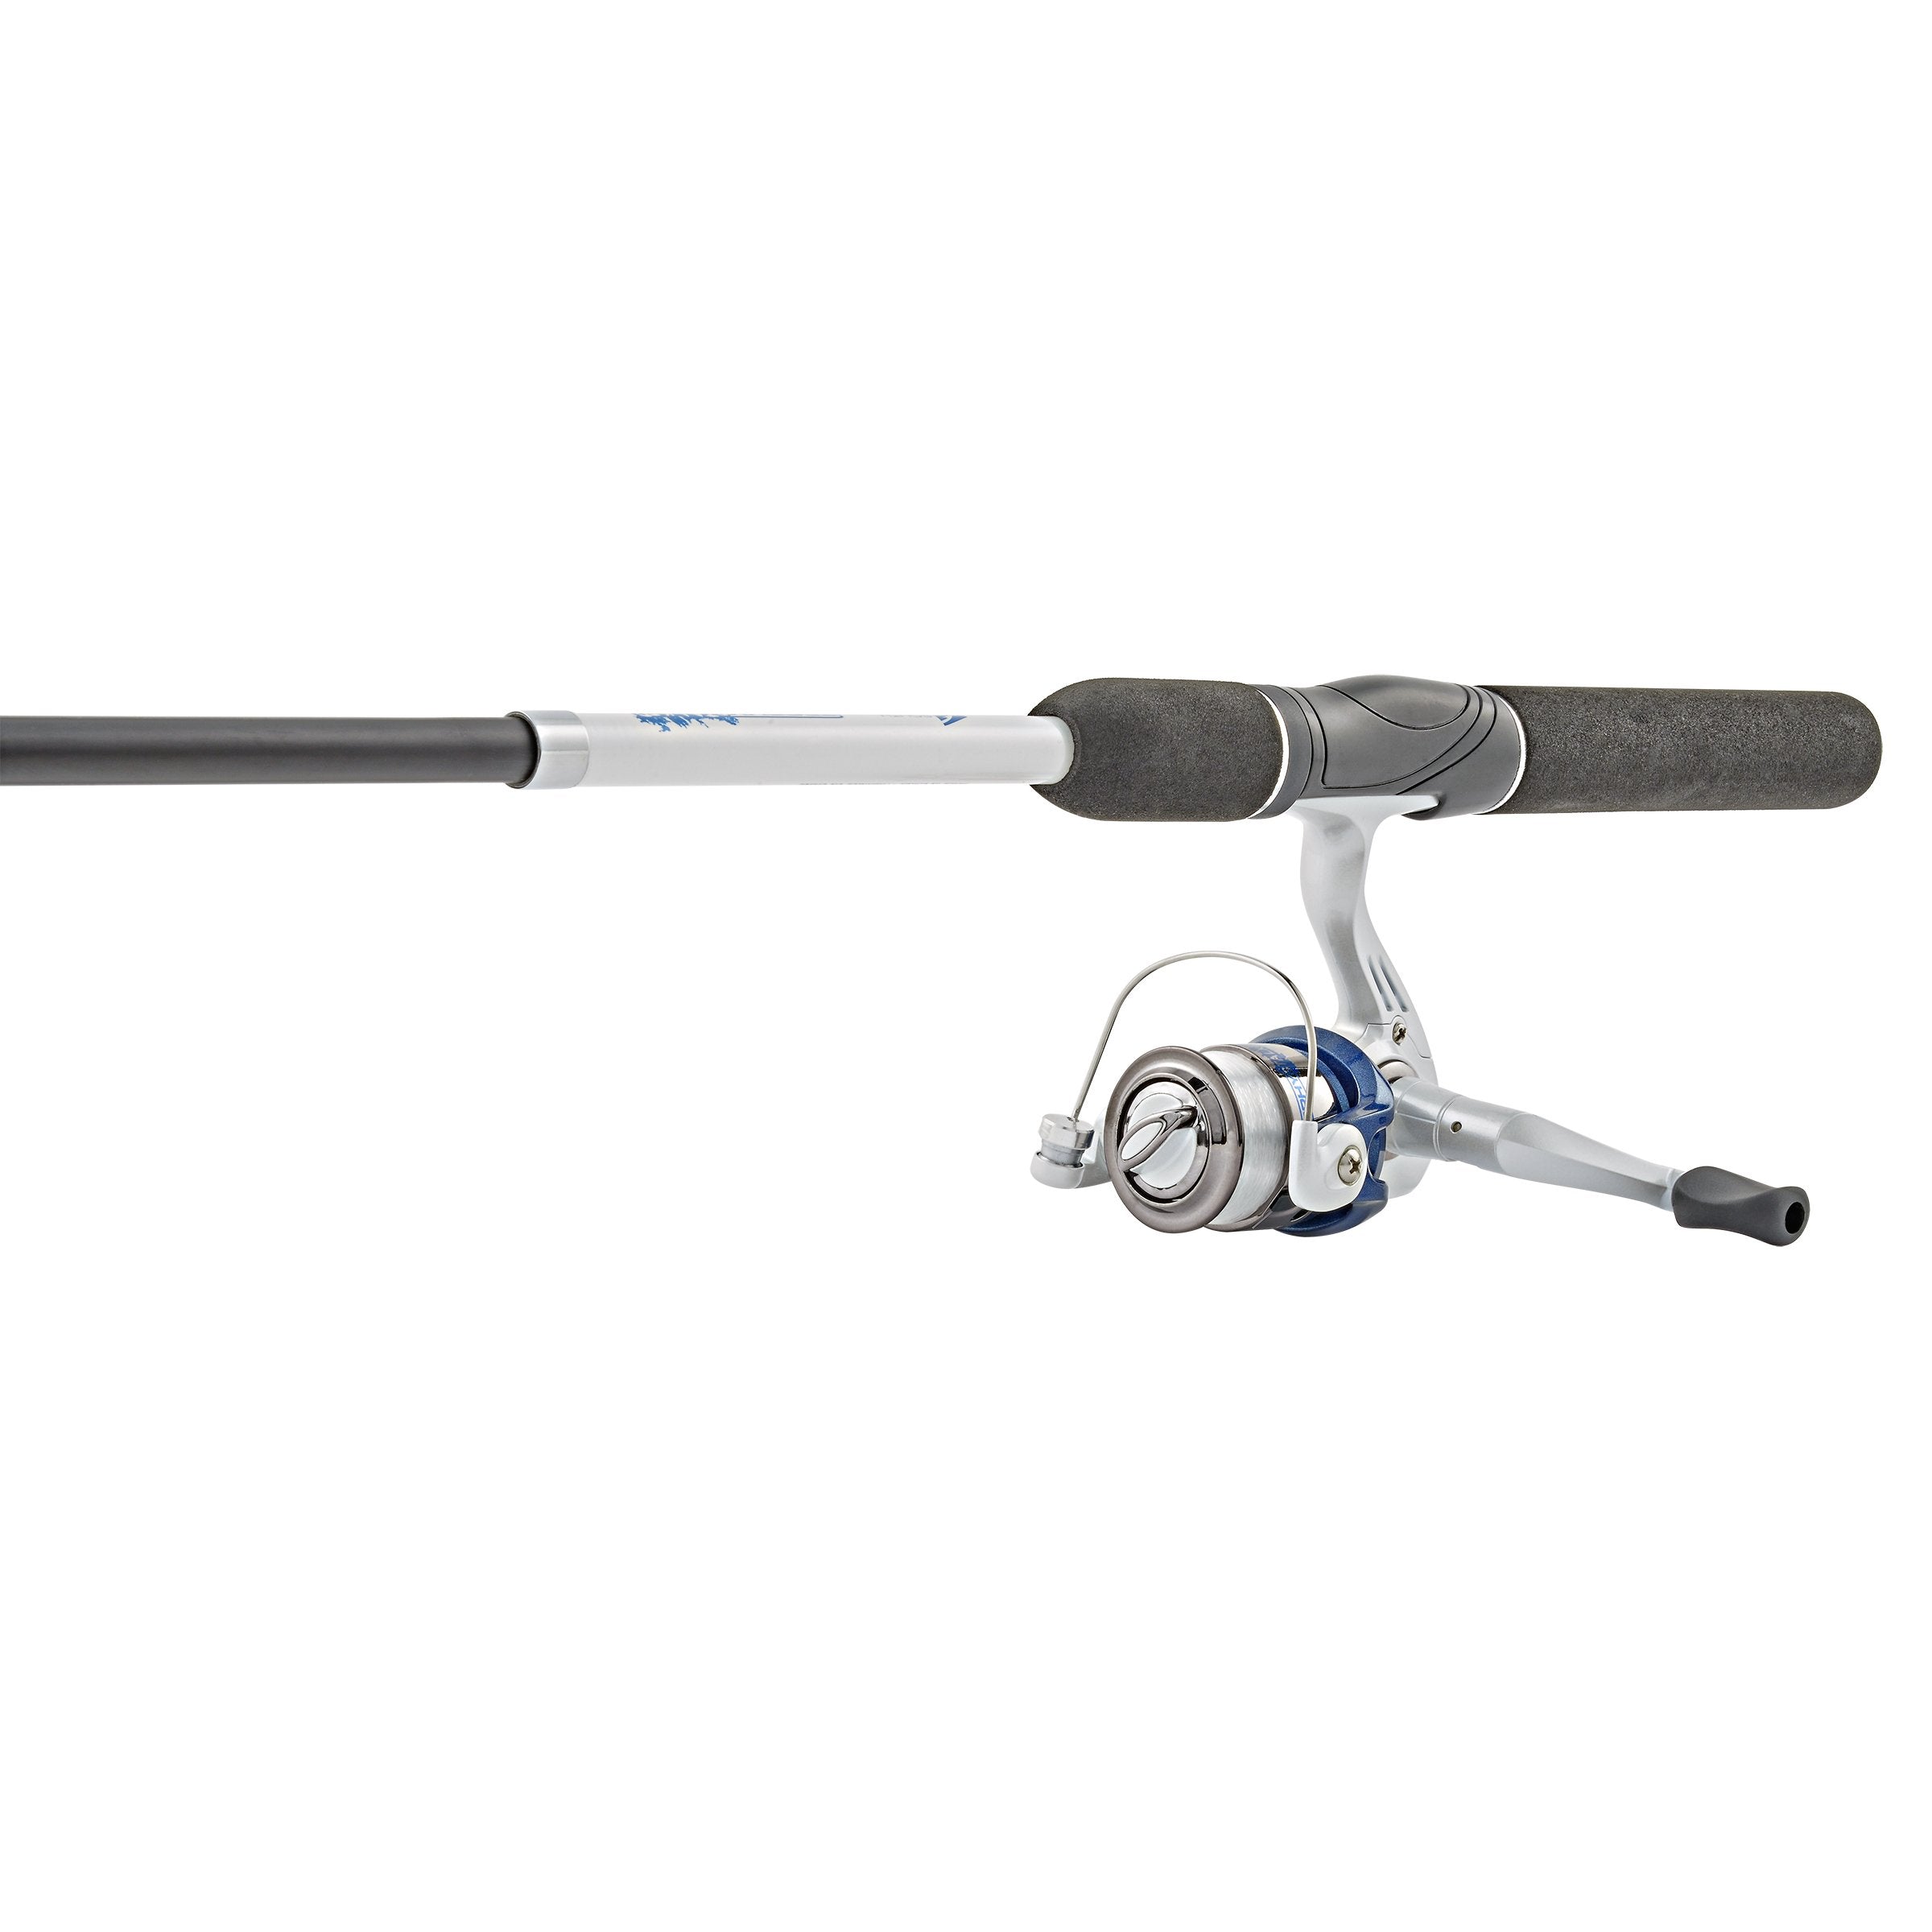 South Bend® Crappie Stalker Bream Pole